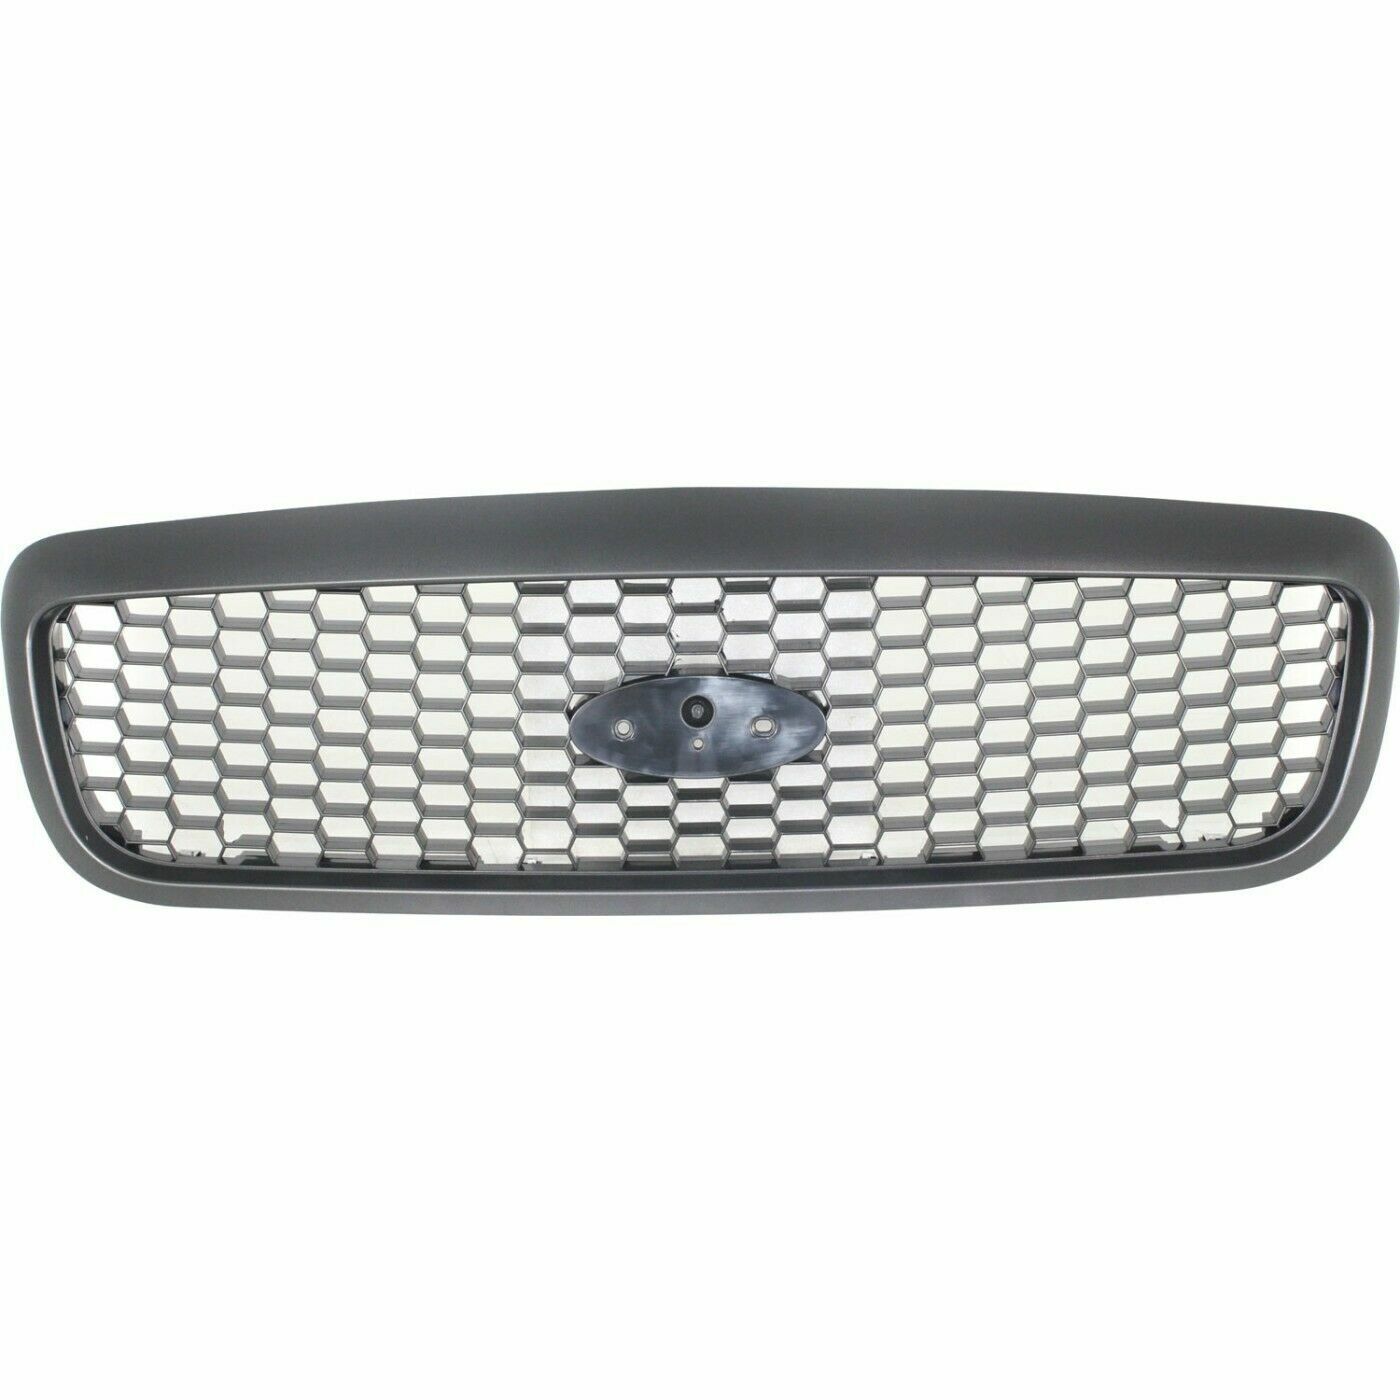 NEW Matte Black Grille For 1998-2011 Ford Crown Victoria FO1200388 SHIPS TODAY